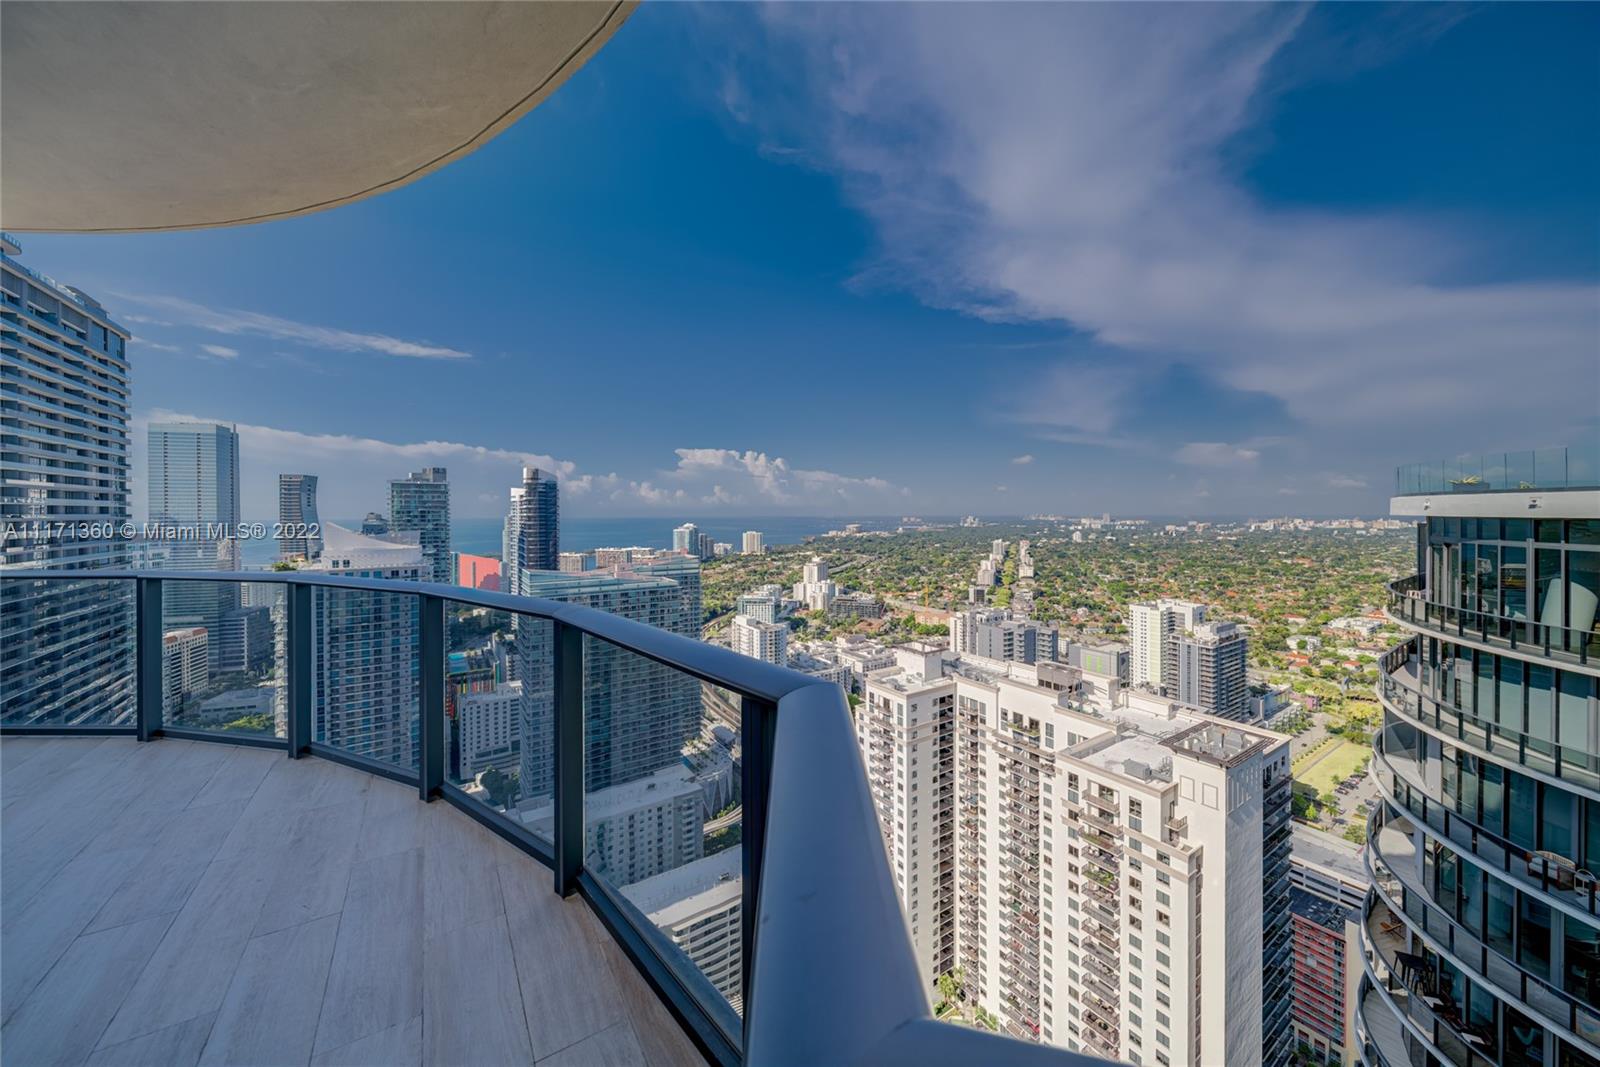 This unique unit on the 47th floor offers you views from the balcony that circle the Miami Skyline & Bay area to view both sunrise and sunset. Unit features 12 FT ceilings with panoramic views from every room along with an open layout floor plan.